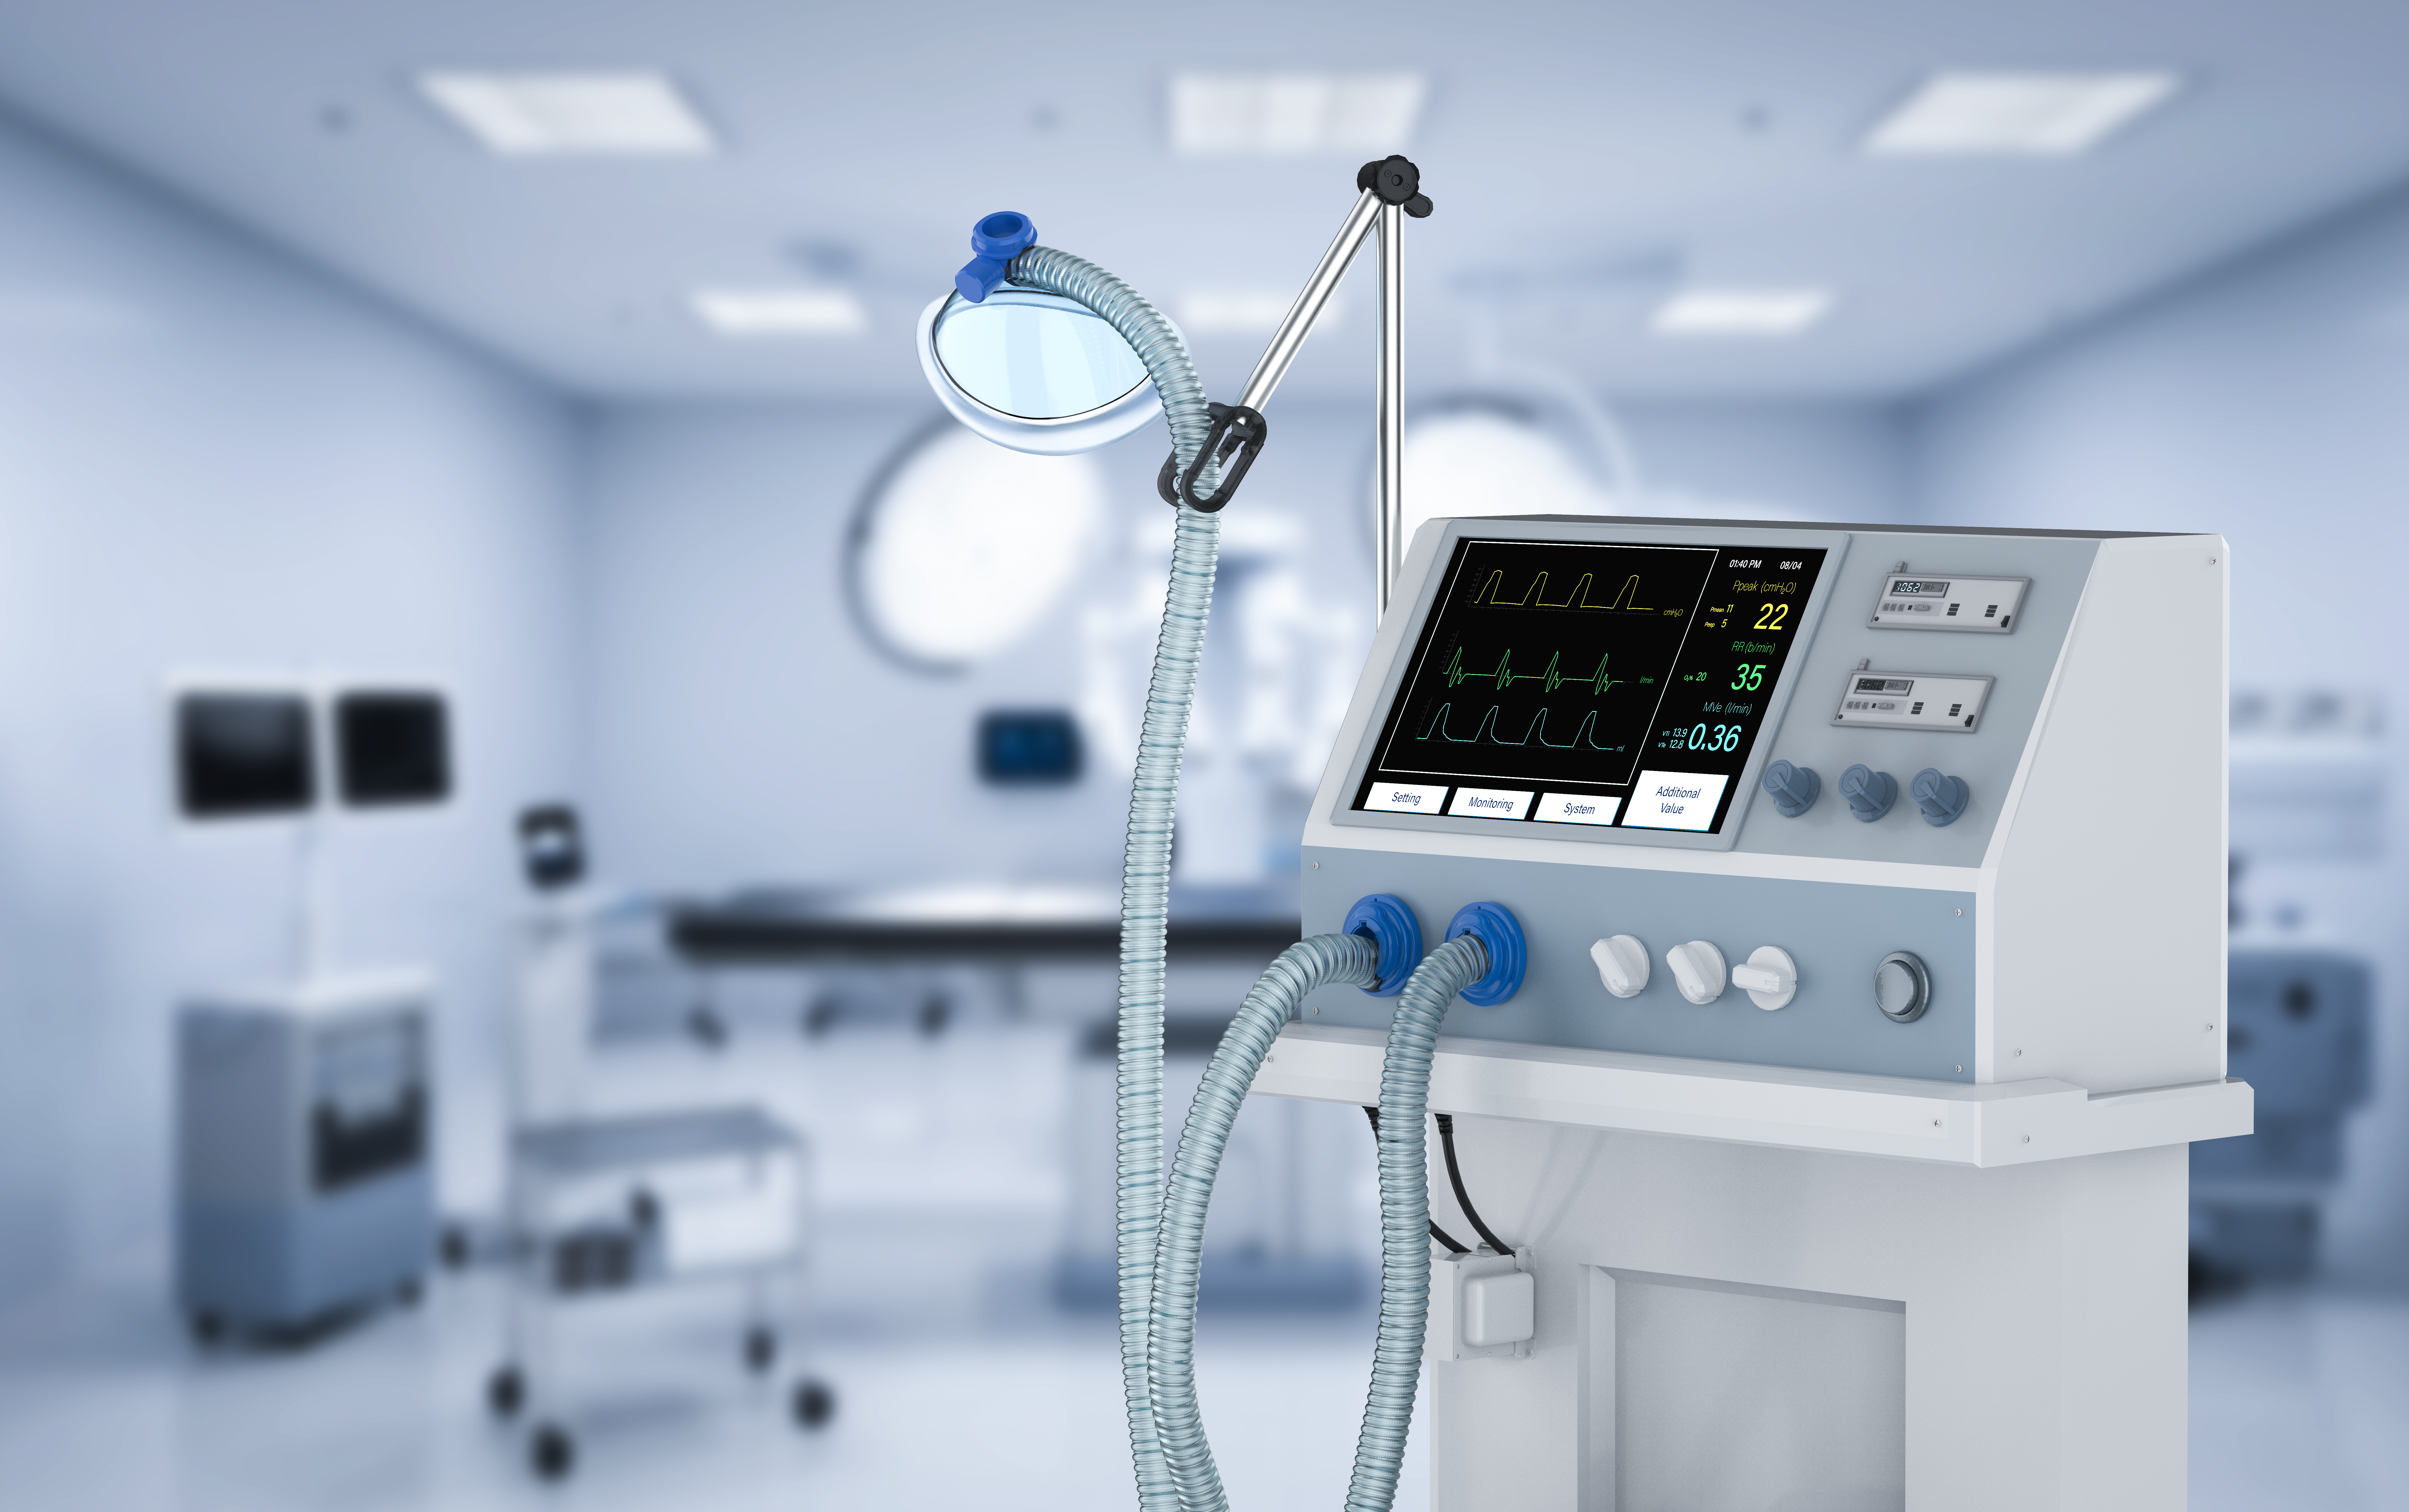 How Does A Ventilator Work?